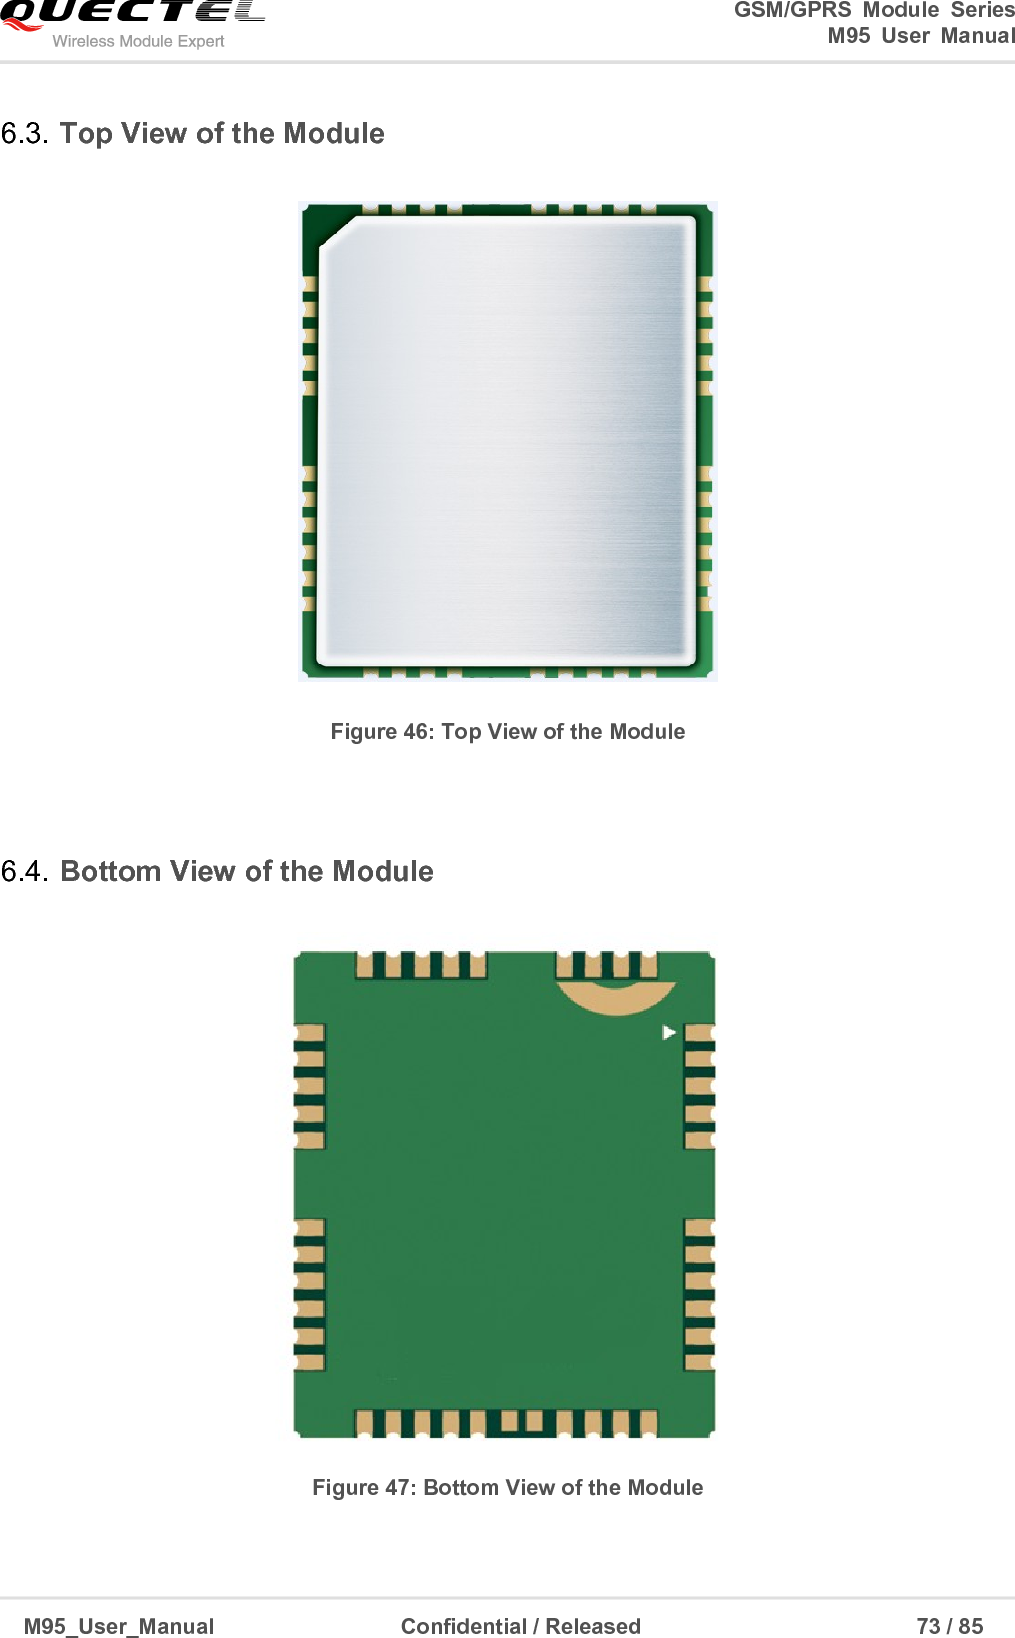                                                                              GSM/GPRS  Module  Series                                                                 M95  User  Manual  M95_User_Manual                                  Confidential / Released                             73 / 85    6.3. Top View of the Module   Figure 46: Top View of the Module  6.4. Bottom View of the Module  Figure 47: Bottom View of the Module 